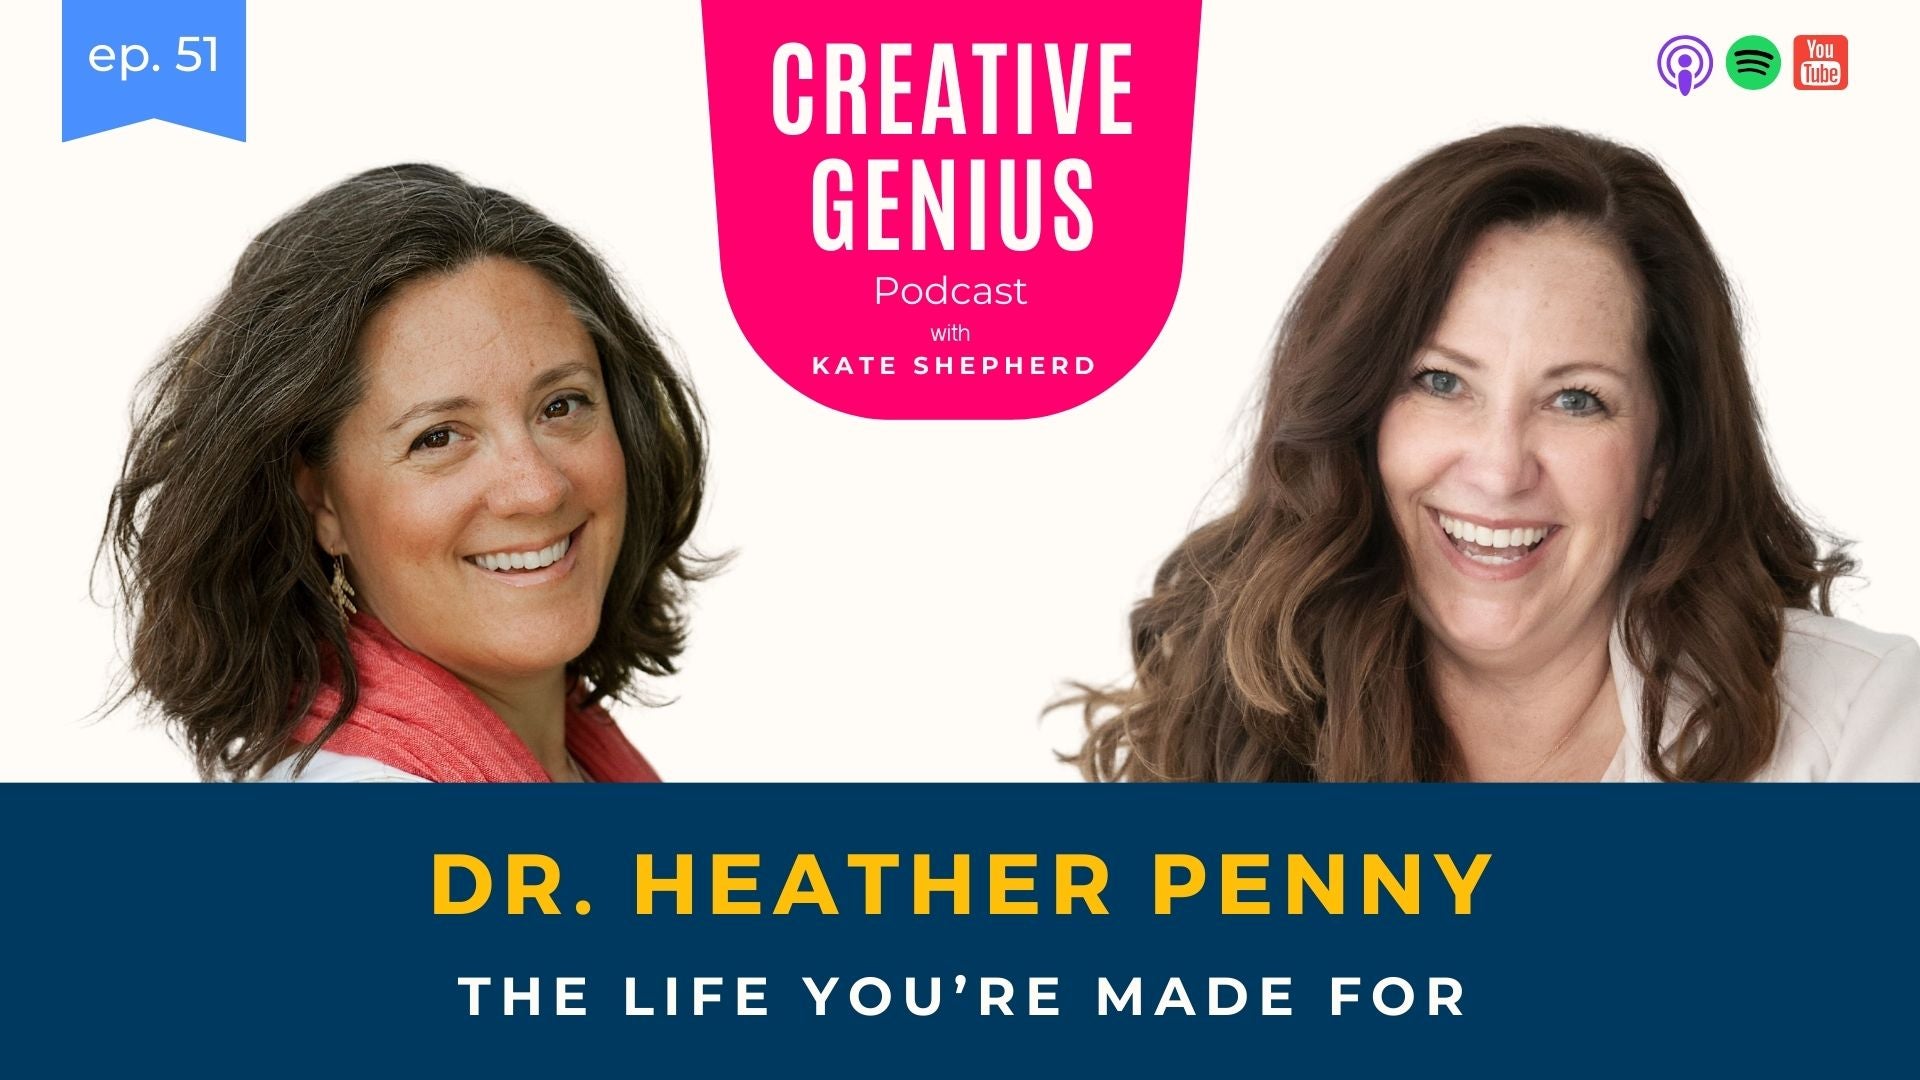 Ep. 51 - Dr. Heather Penny - The Life You're Made For